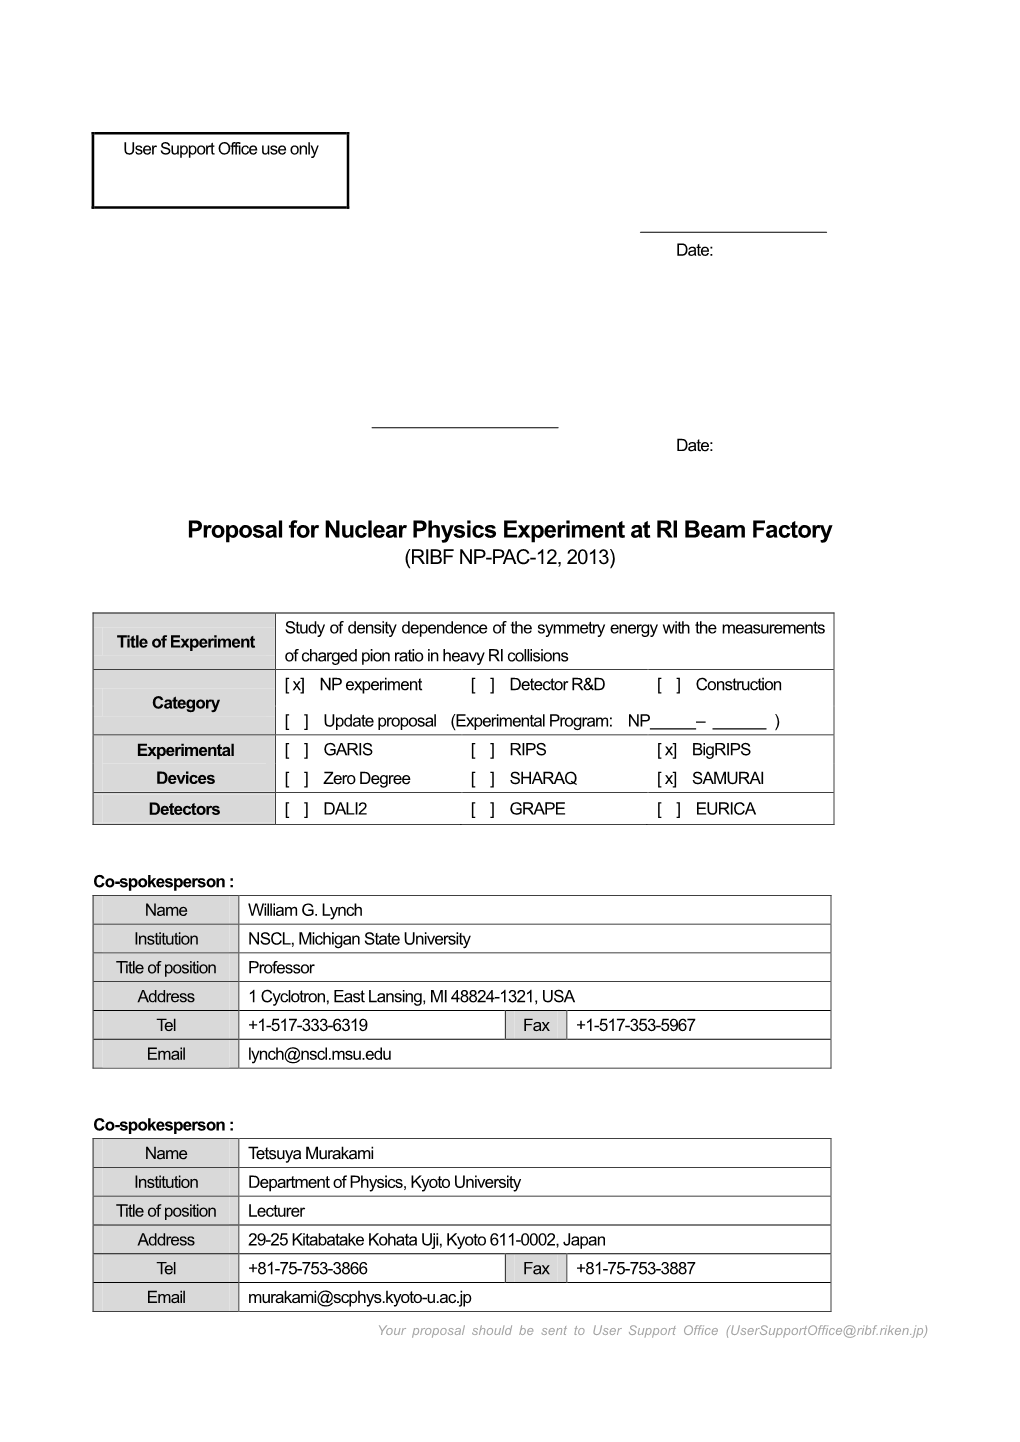 Proposal for Nuclear Physics Experiment at RI Beam Factory (RIBF NP-PAC-12, 2013)